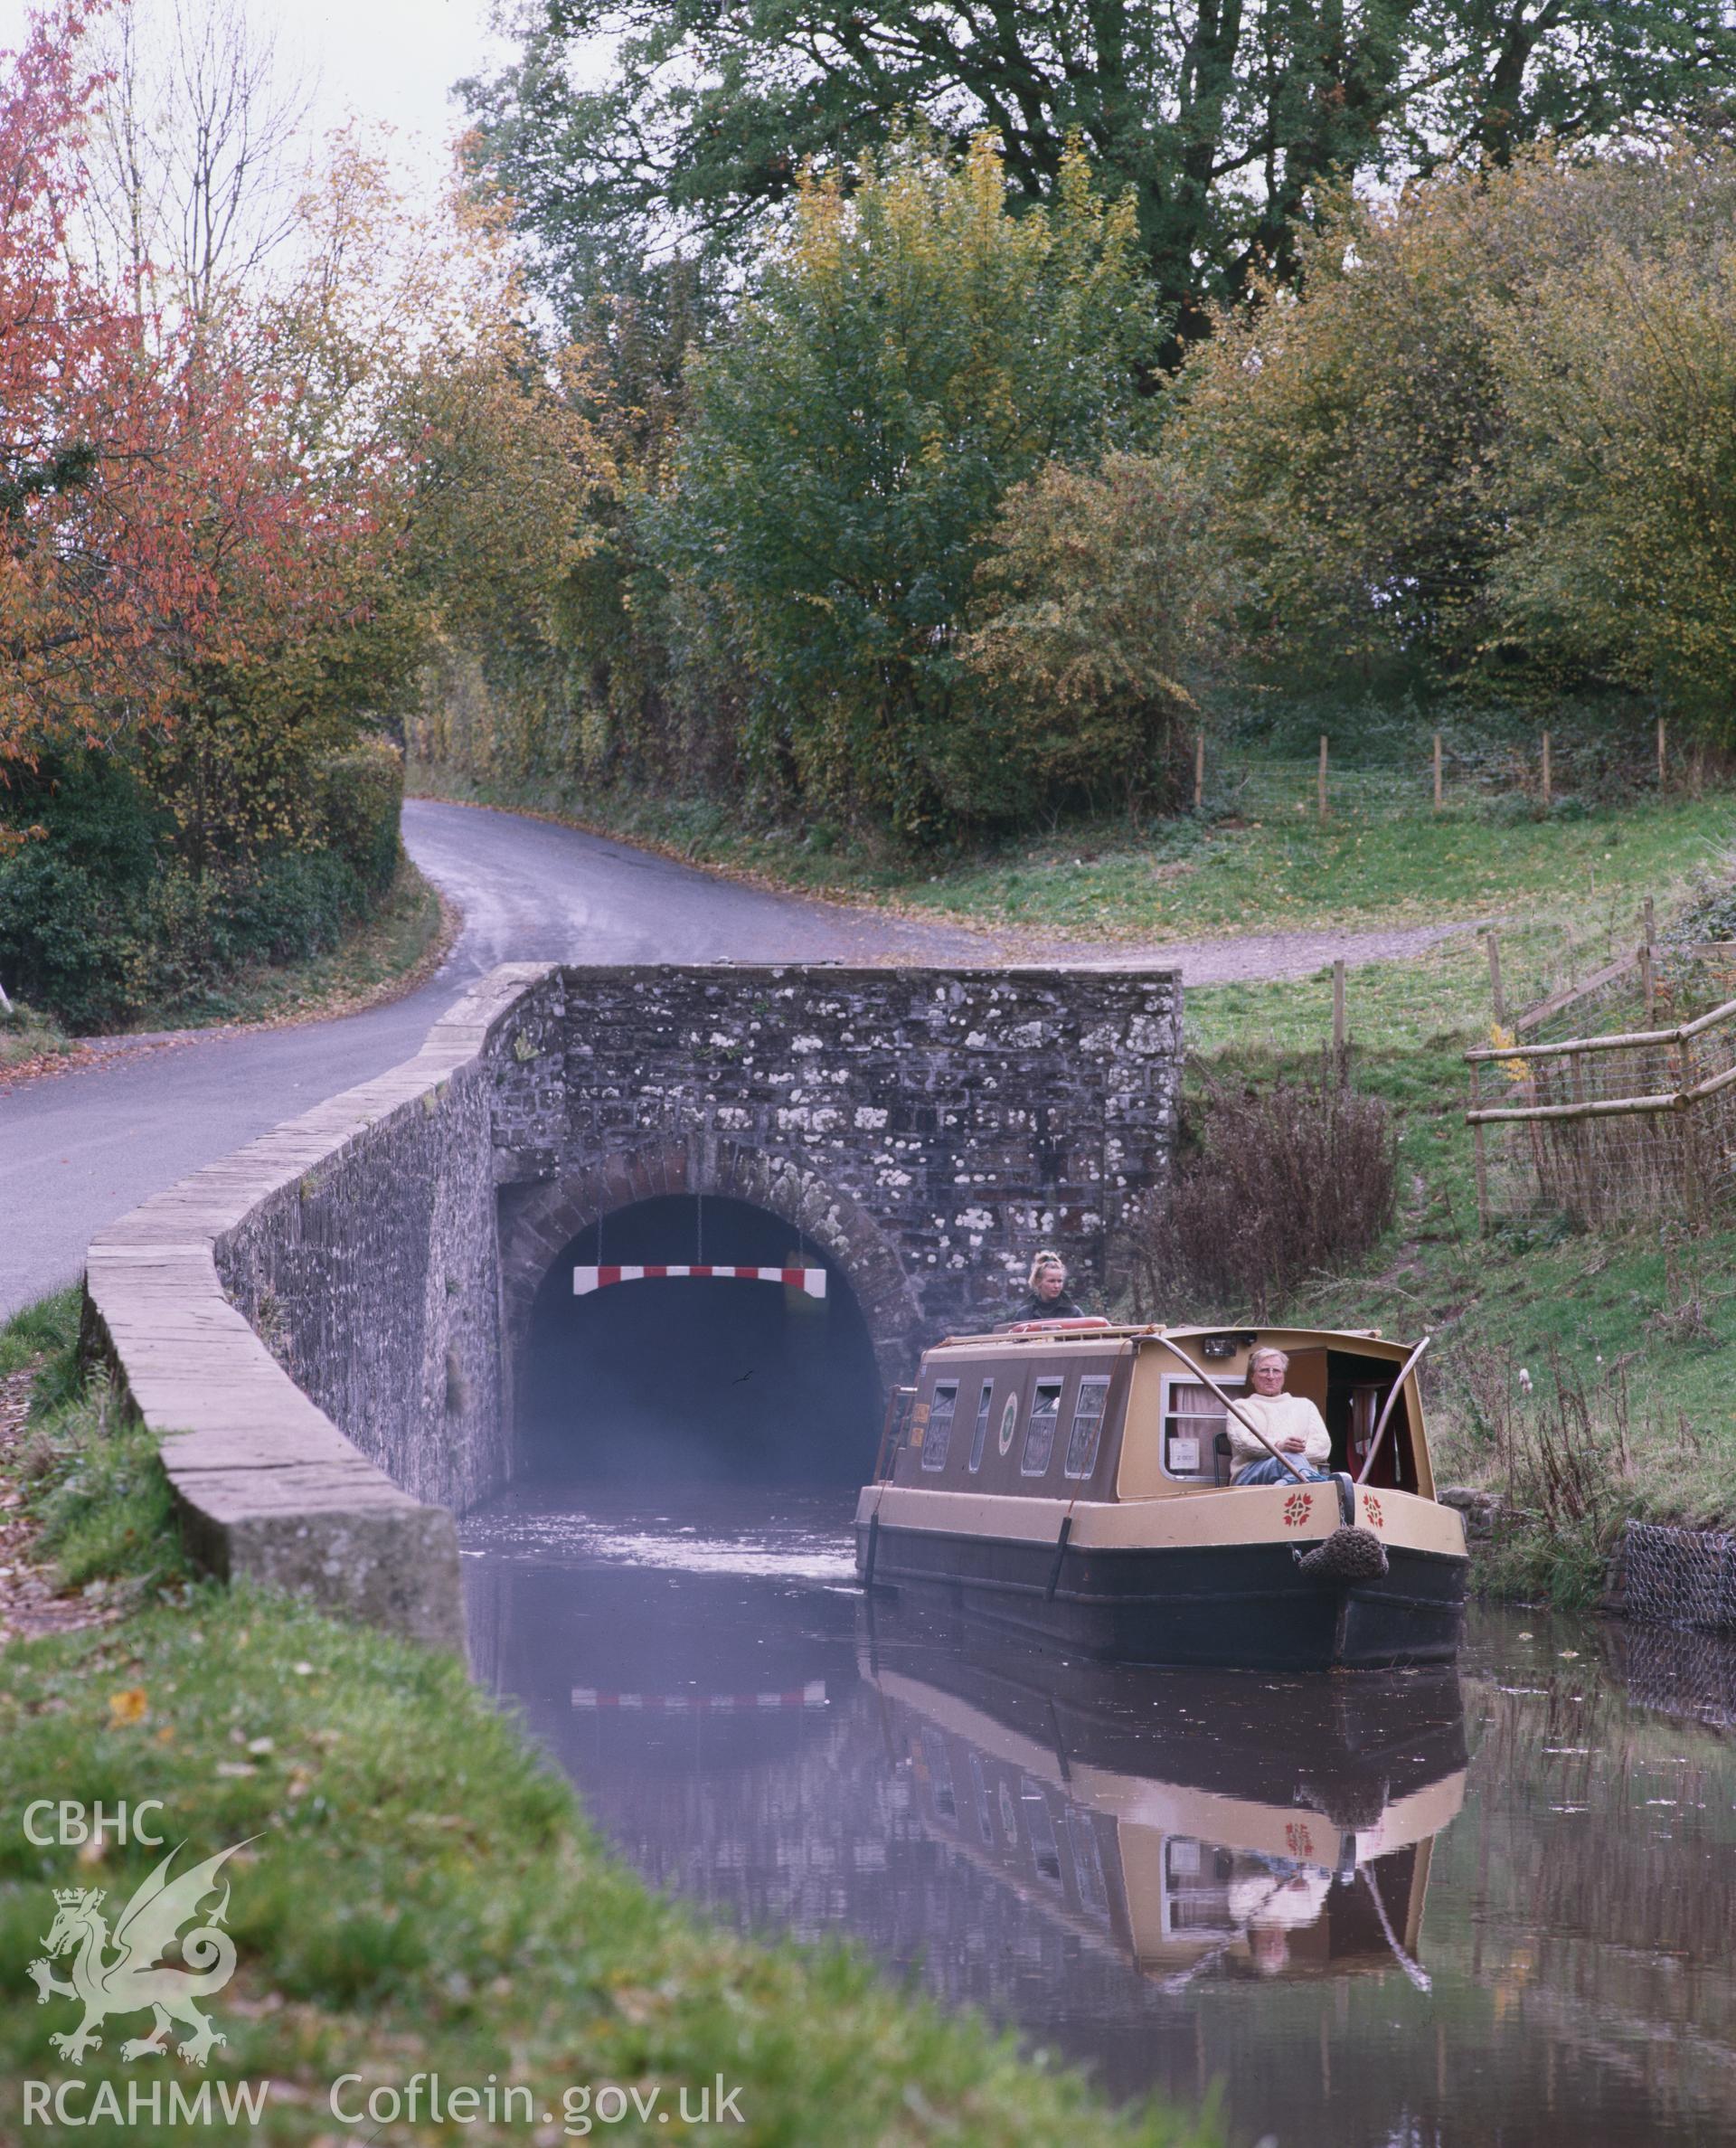 RCAHMW colour transparency showing view of a boat emerging from the Ashford Tunnel, Brecon and Monmouth Canal.